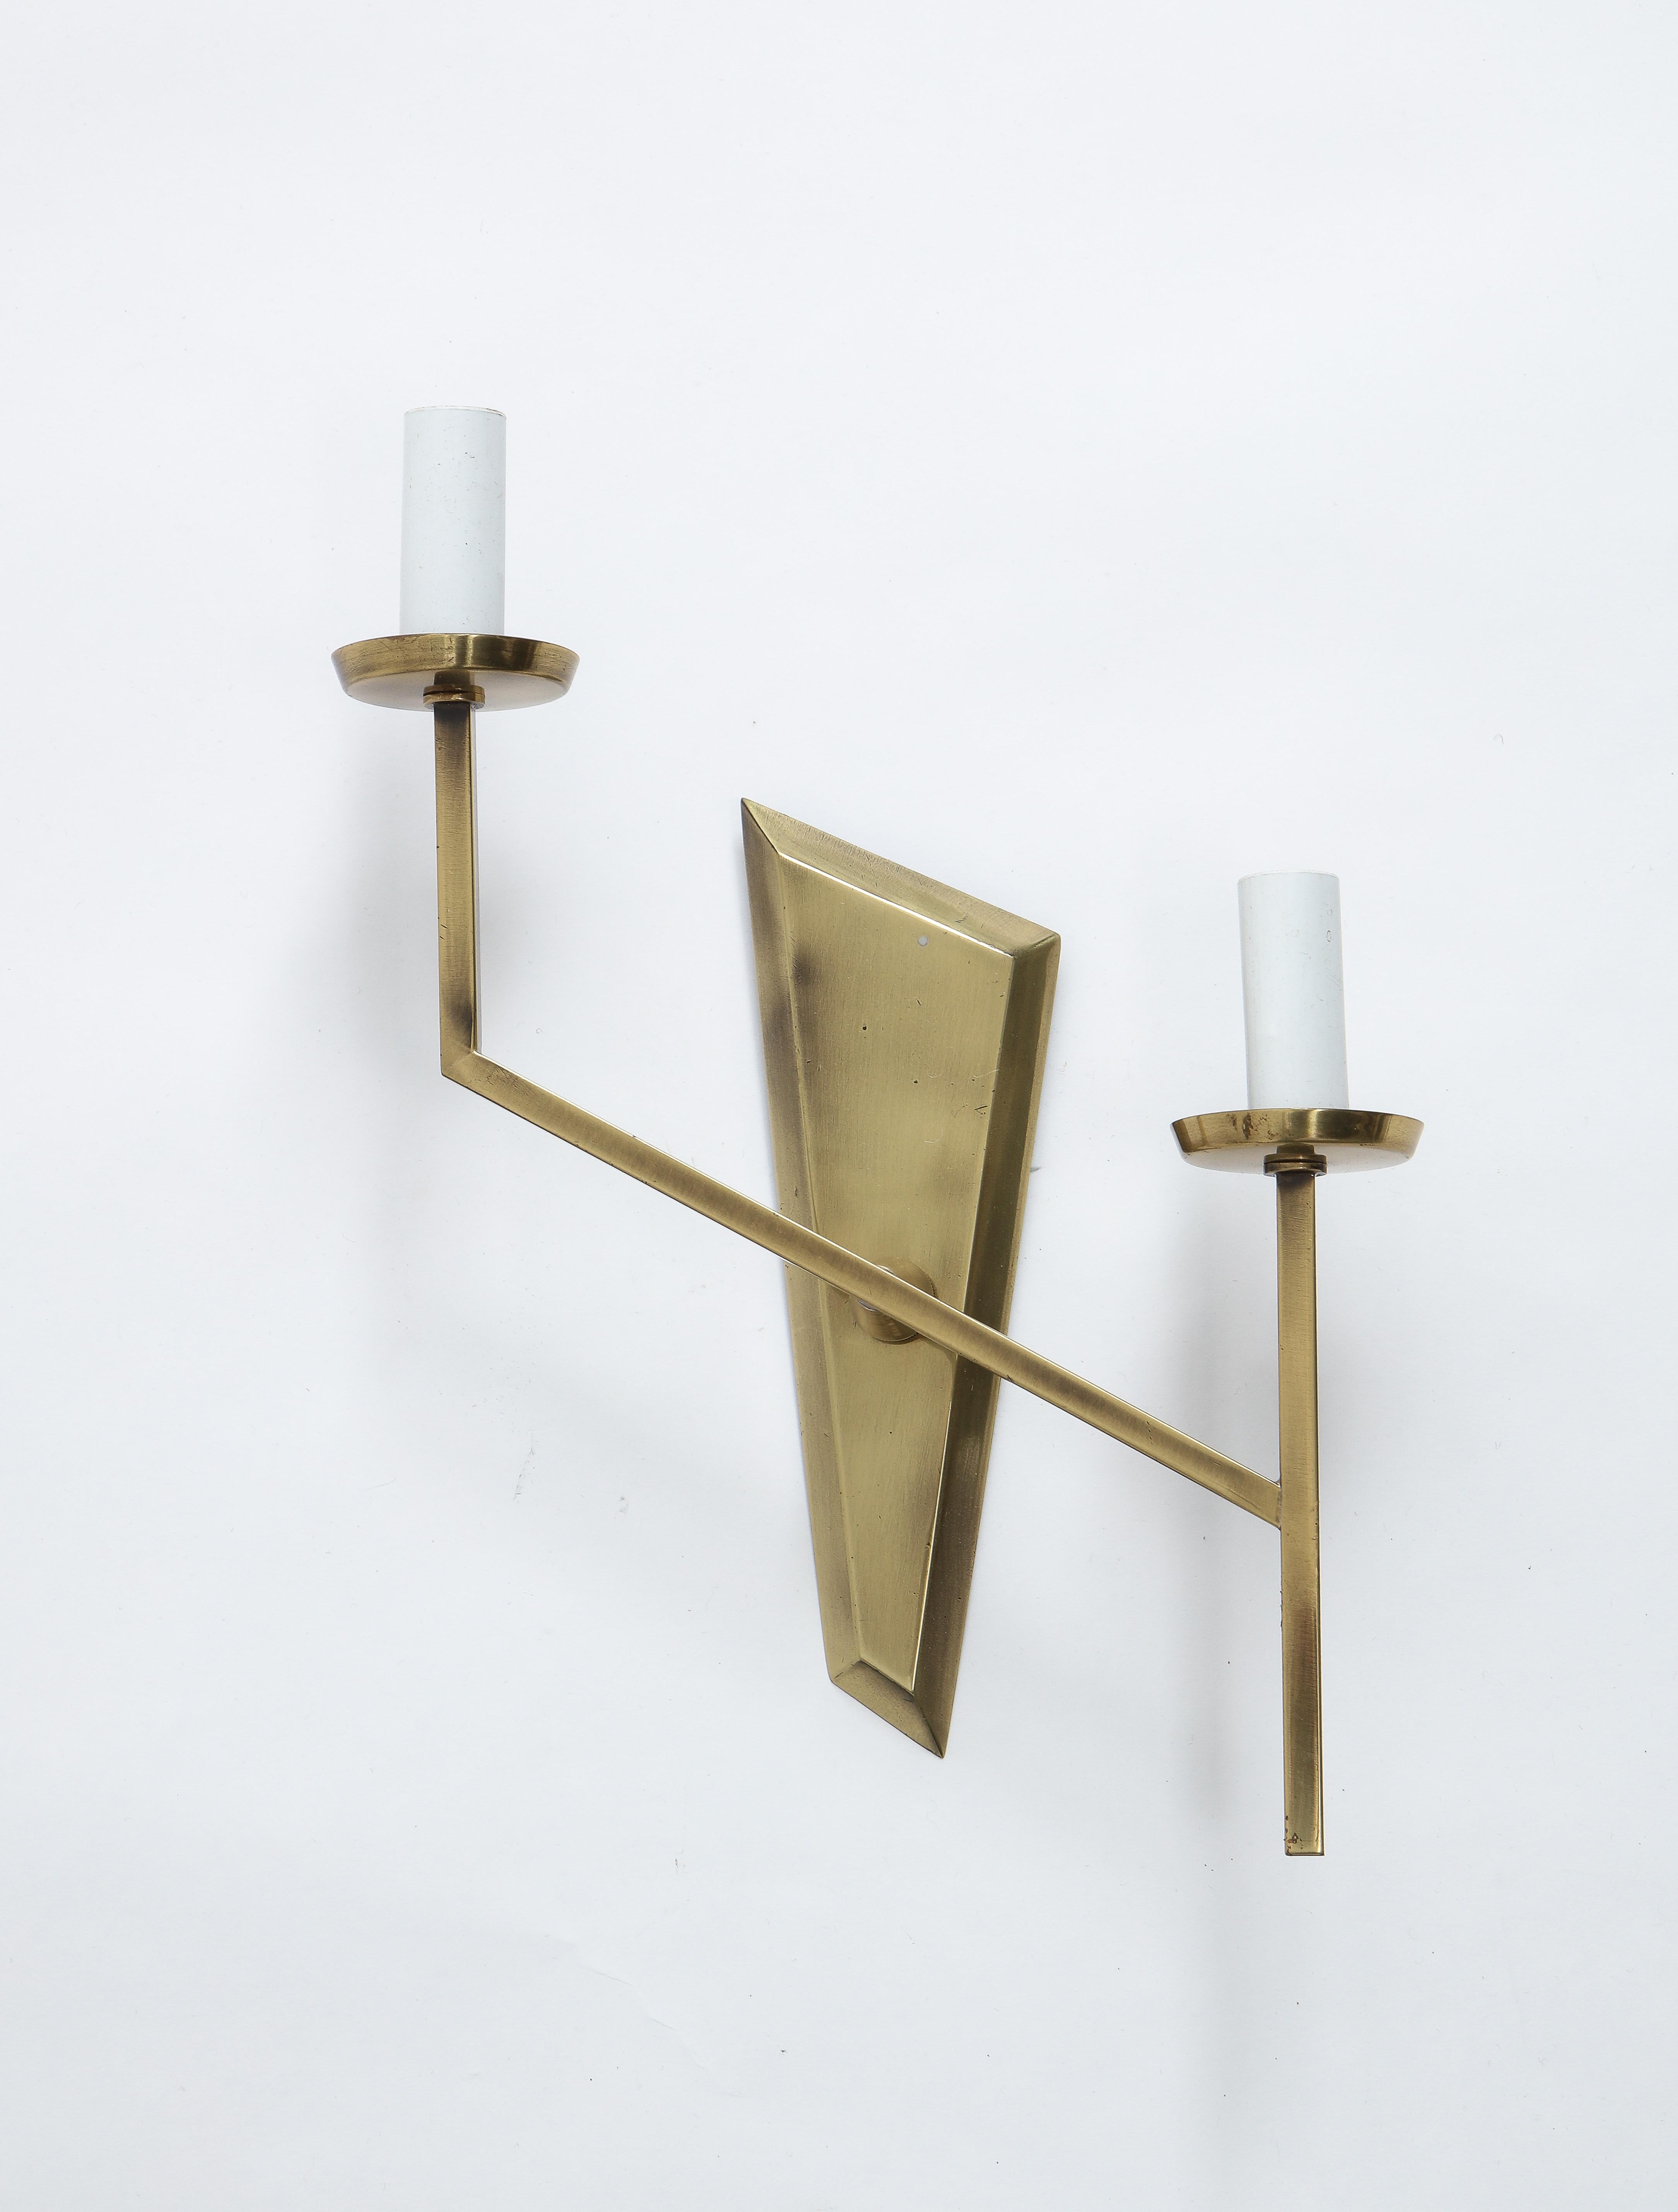 Pair of Asymmetrical Brass Double Sconces, France, 1950s For Sale 1